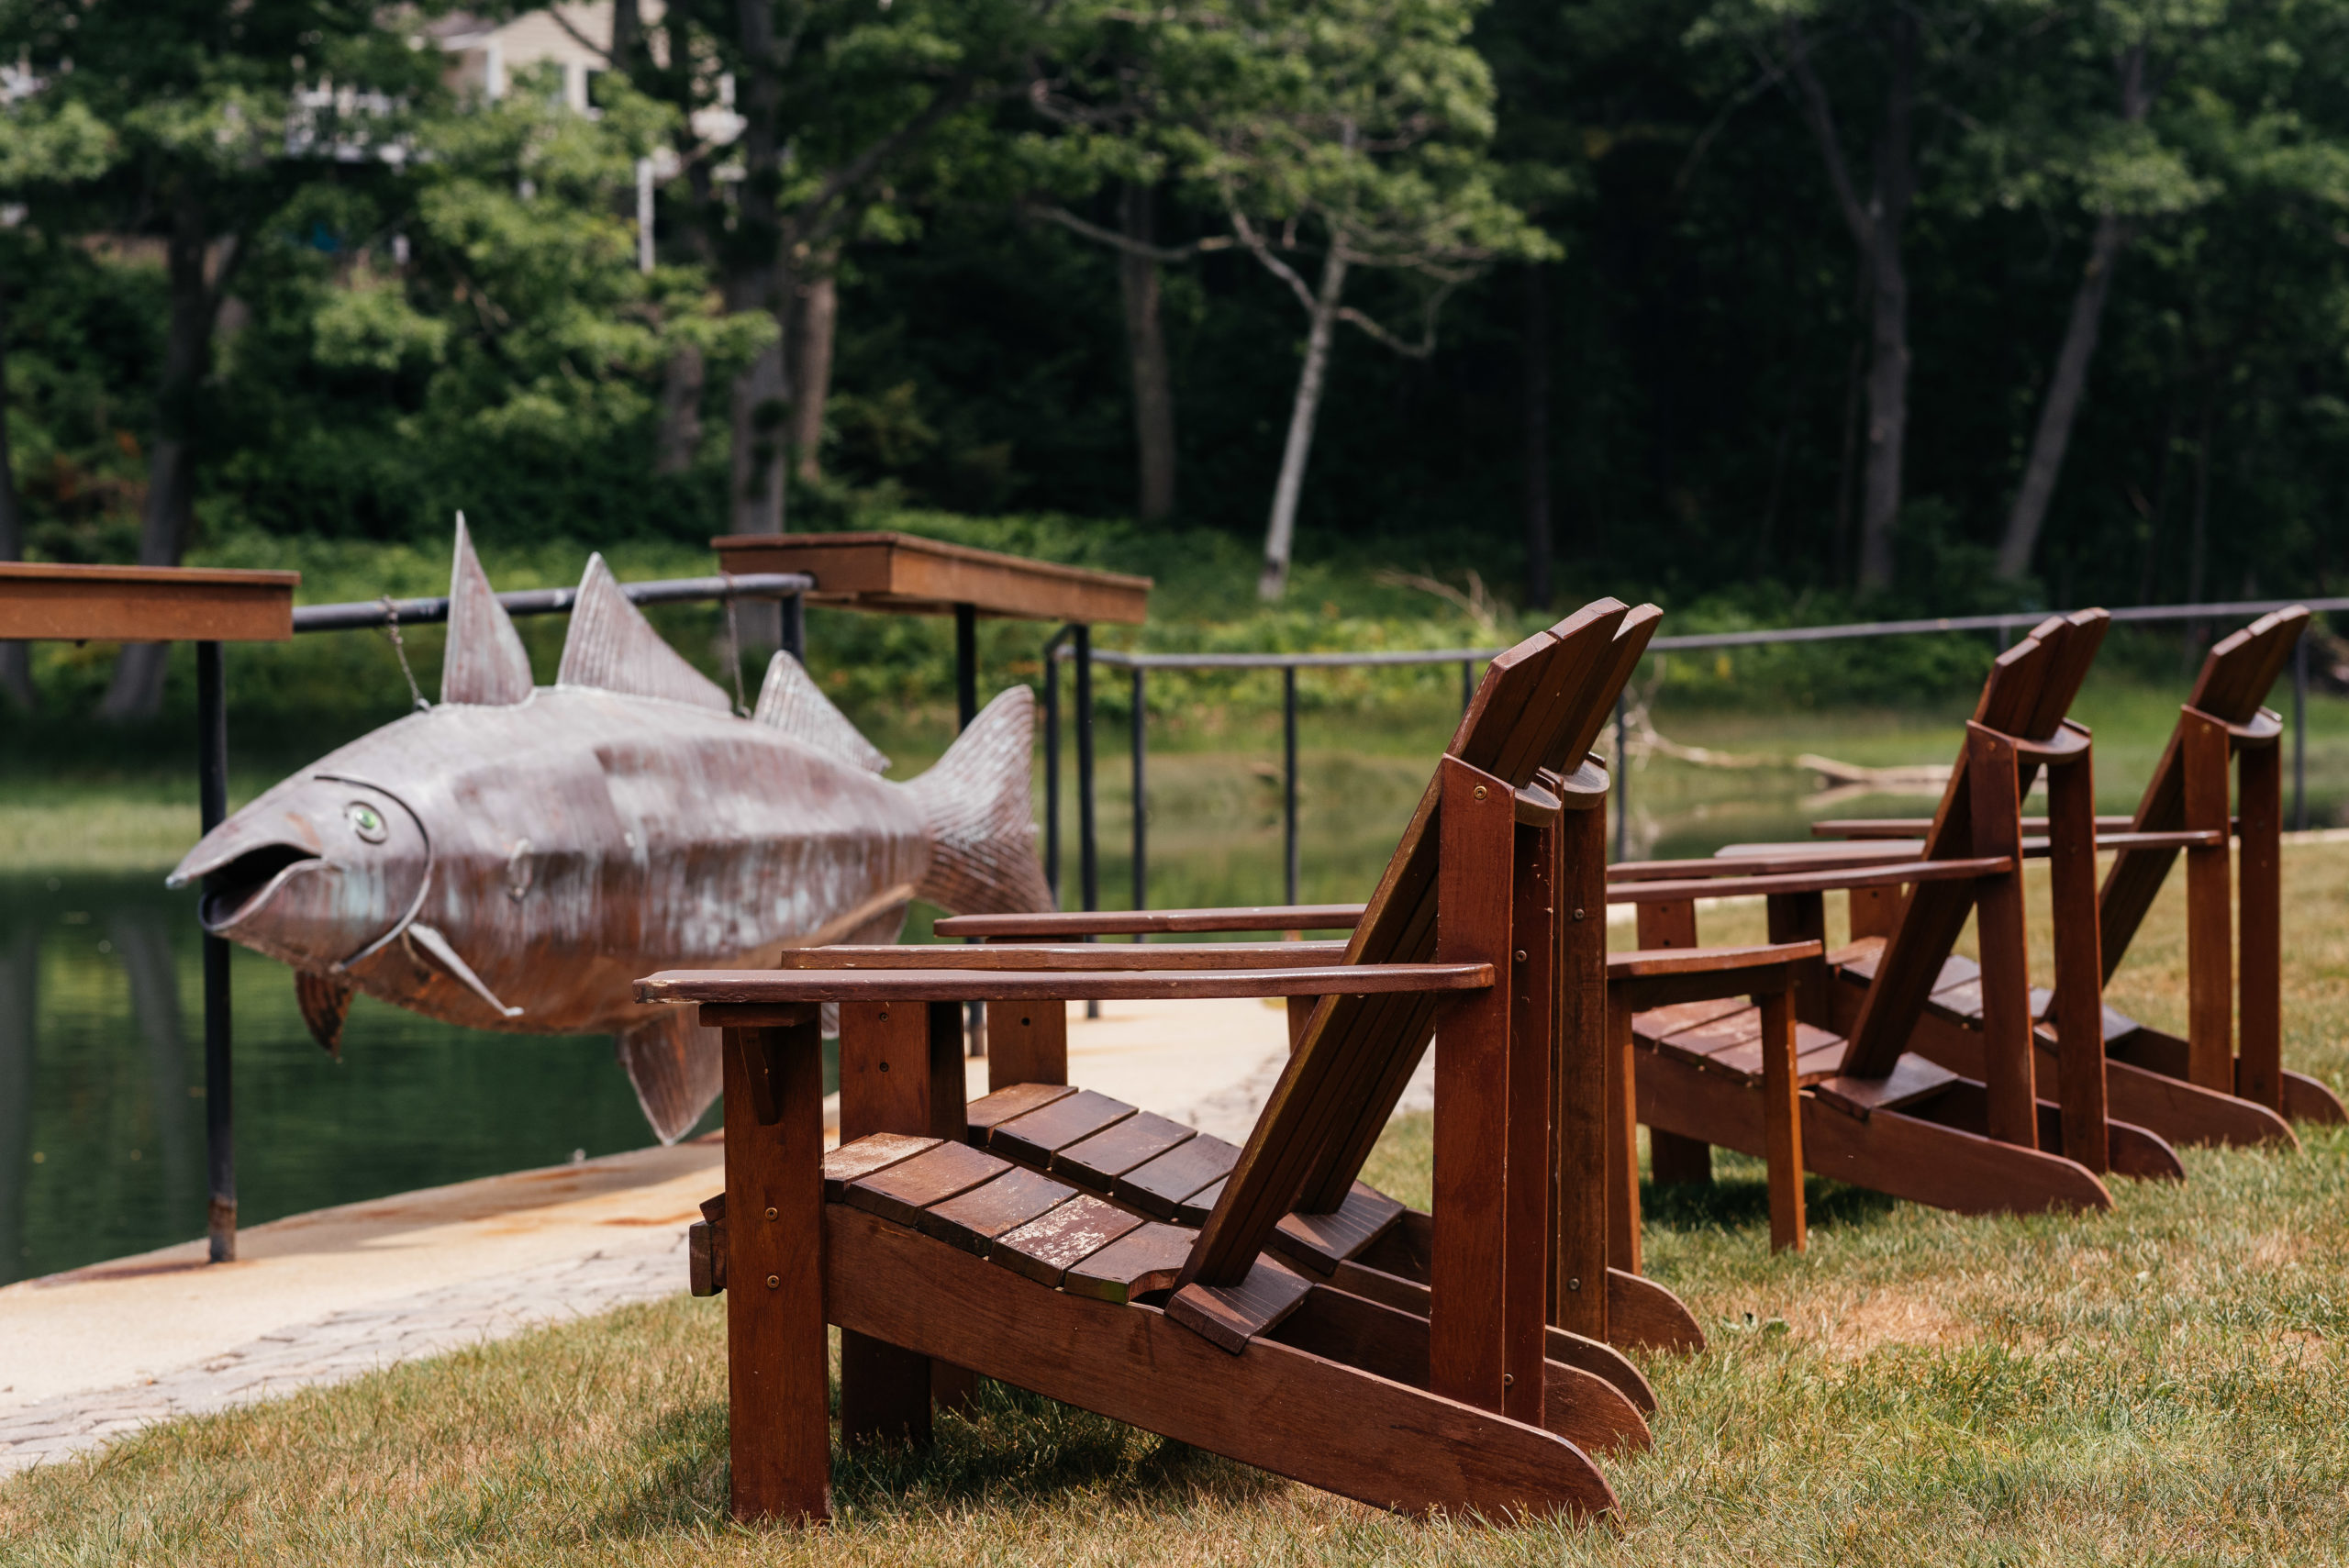 adirondack chairs and metal fish hanging on fence